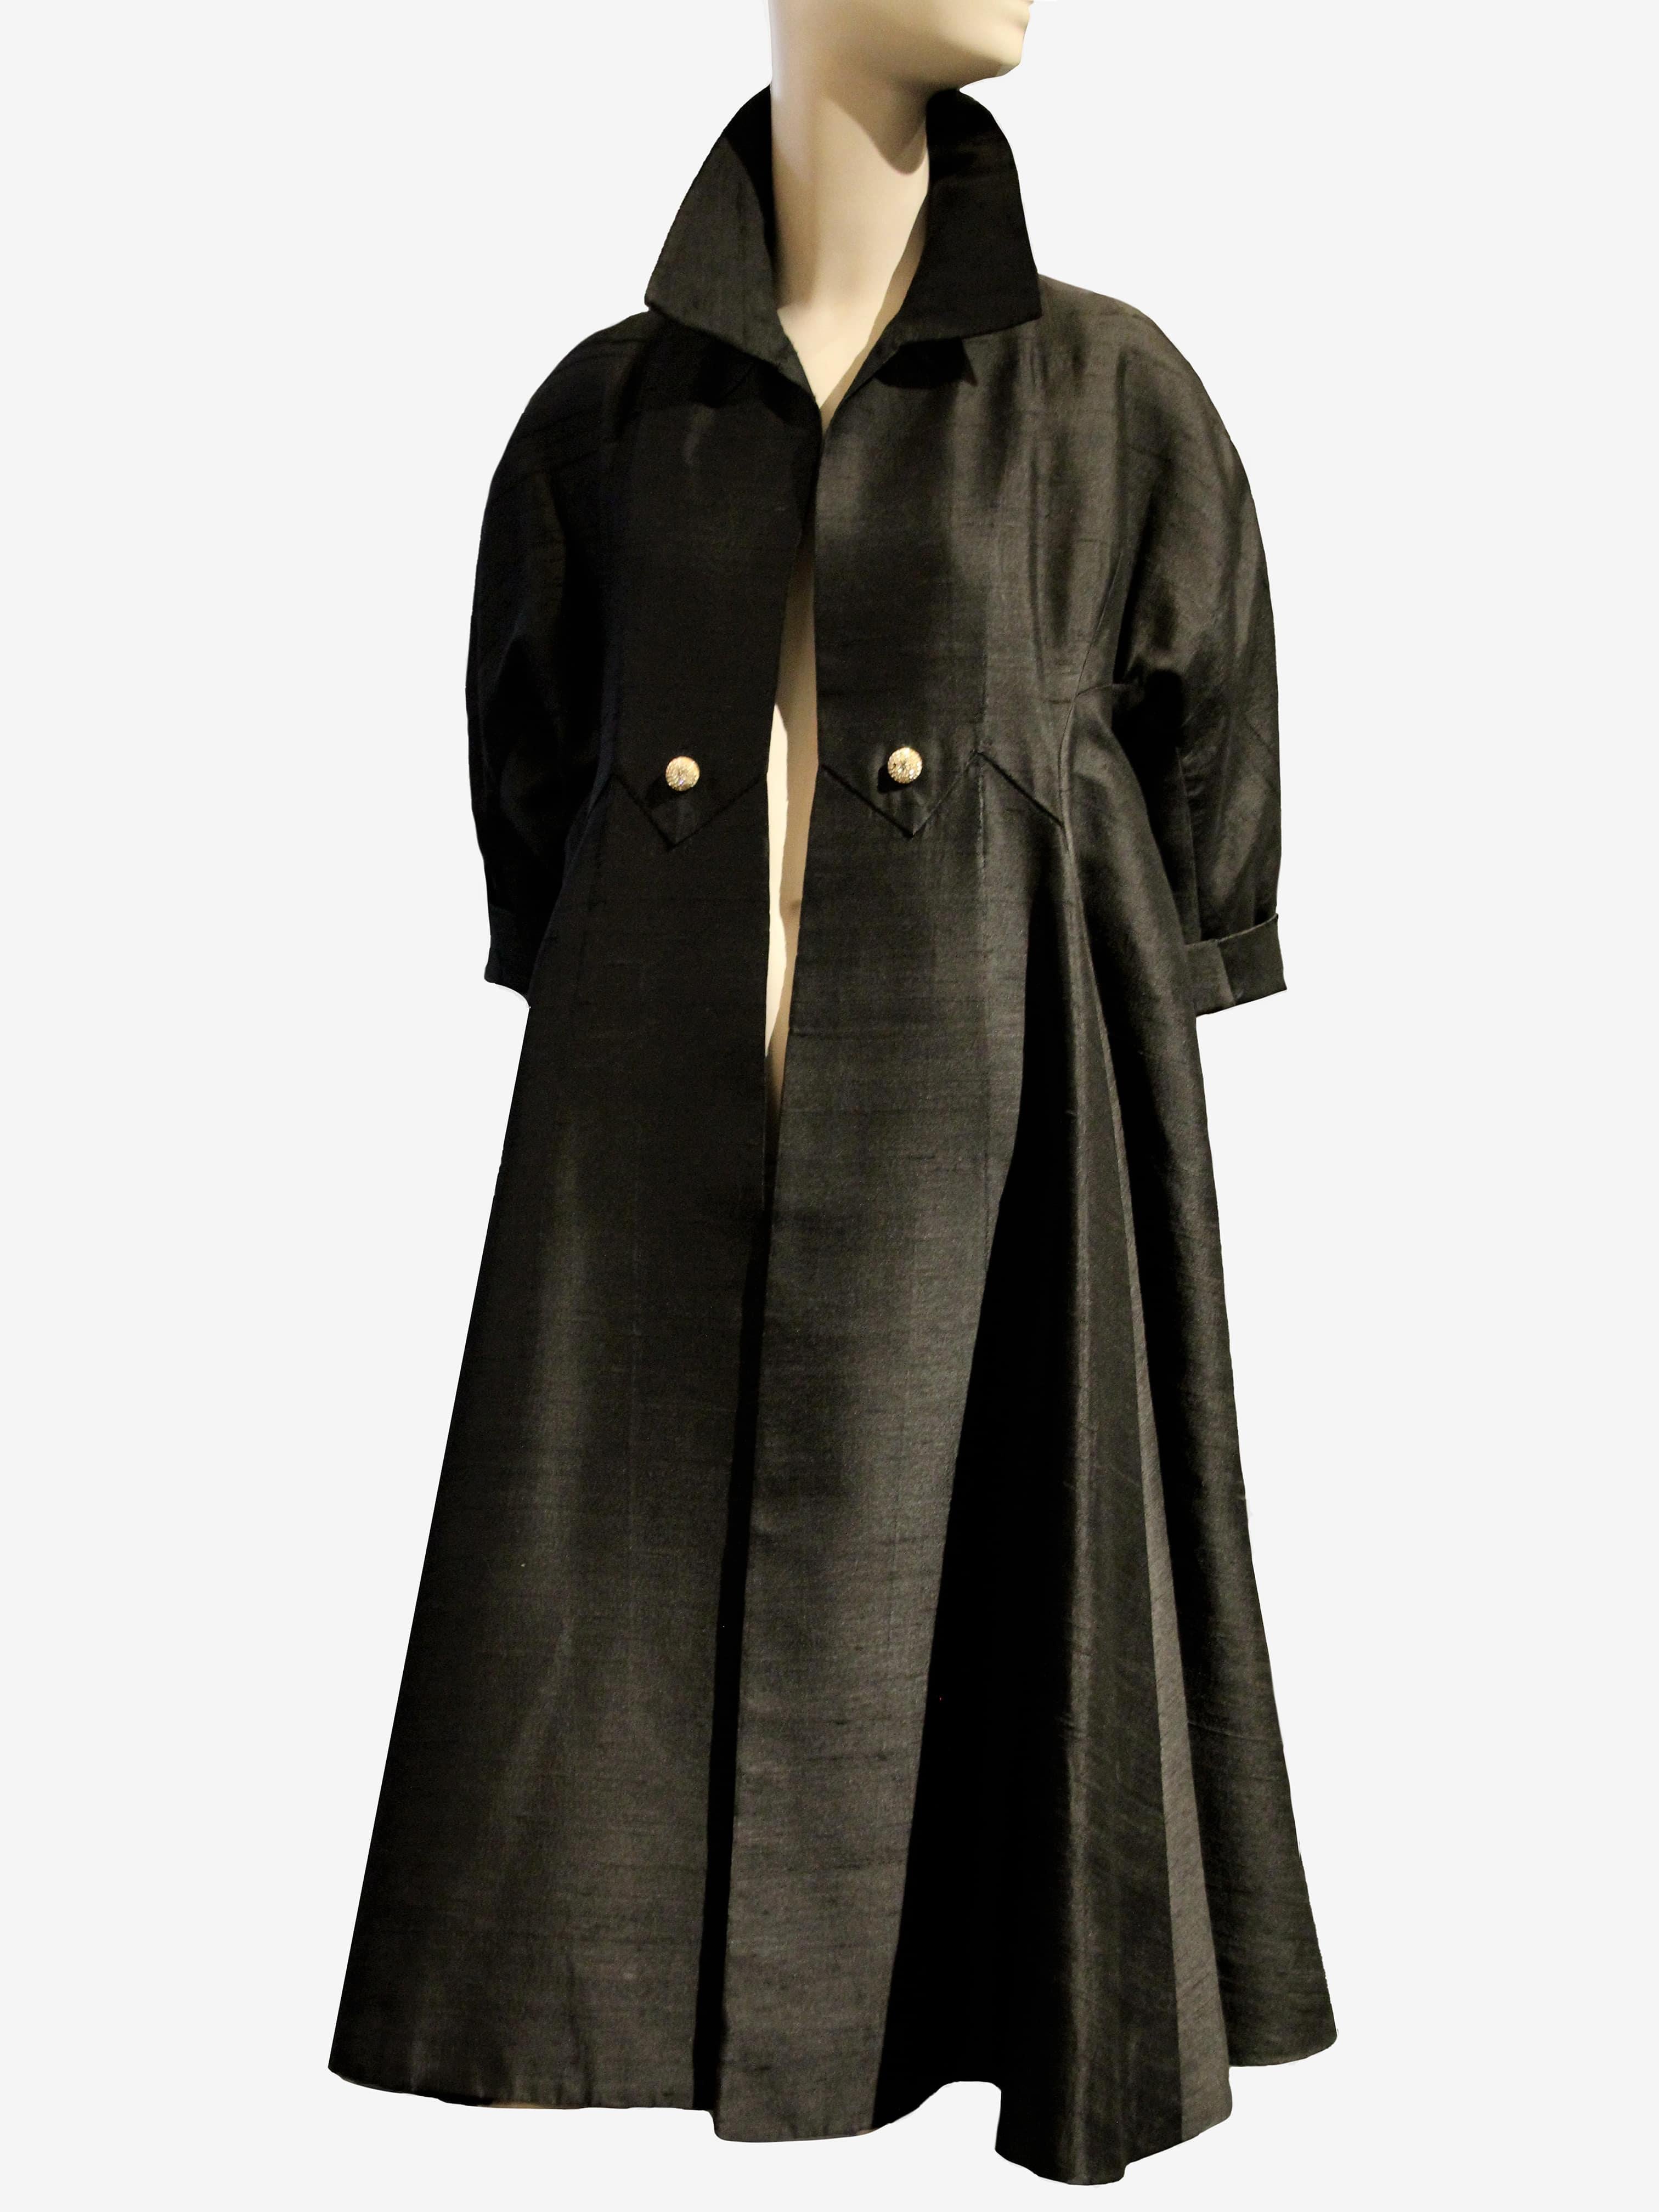 A gorgeous 1952 Christian Dior Spring/Summer Couture black dupioni silk opera coat: Cut in a full and dramatic swing style with volume falling from the raglan shoulders. The front panels are flatteringly lean. Two rhinestone buttons at front. No